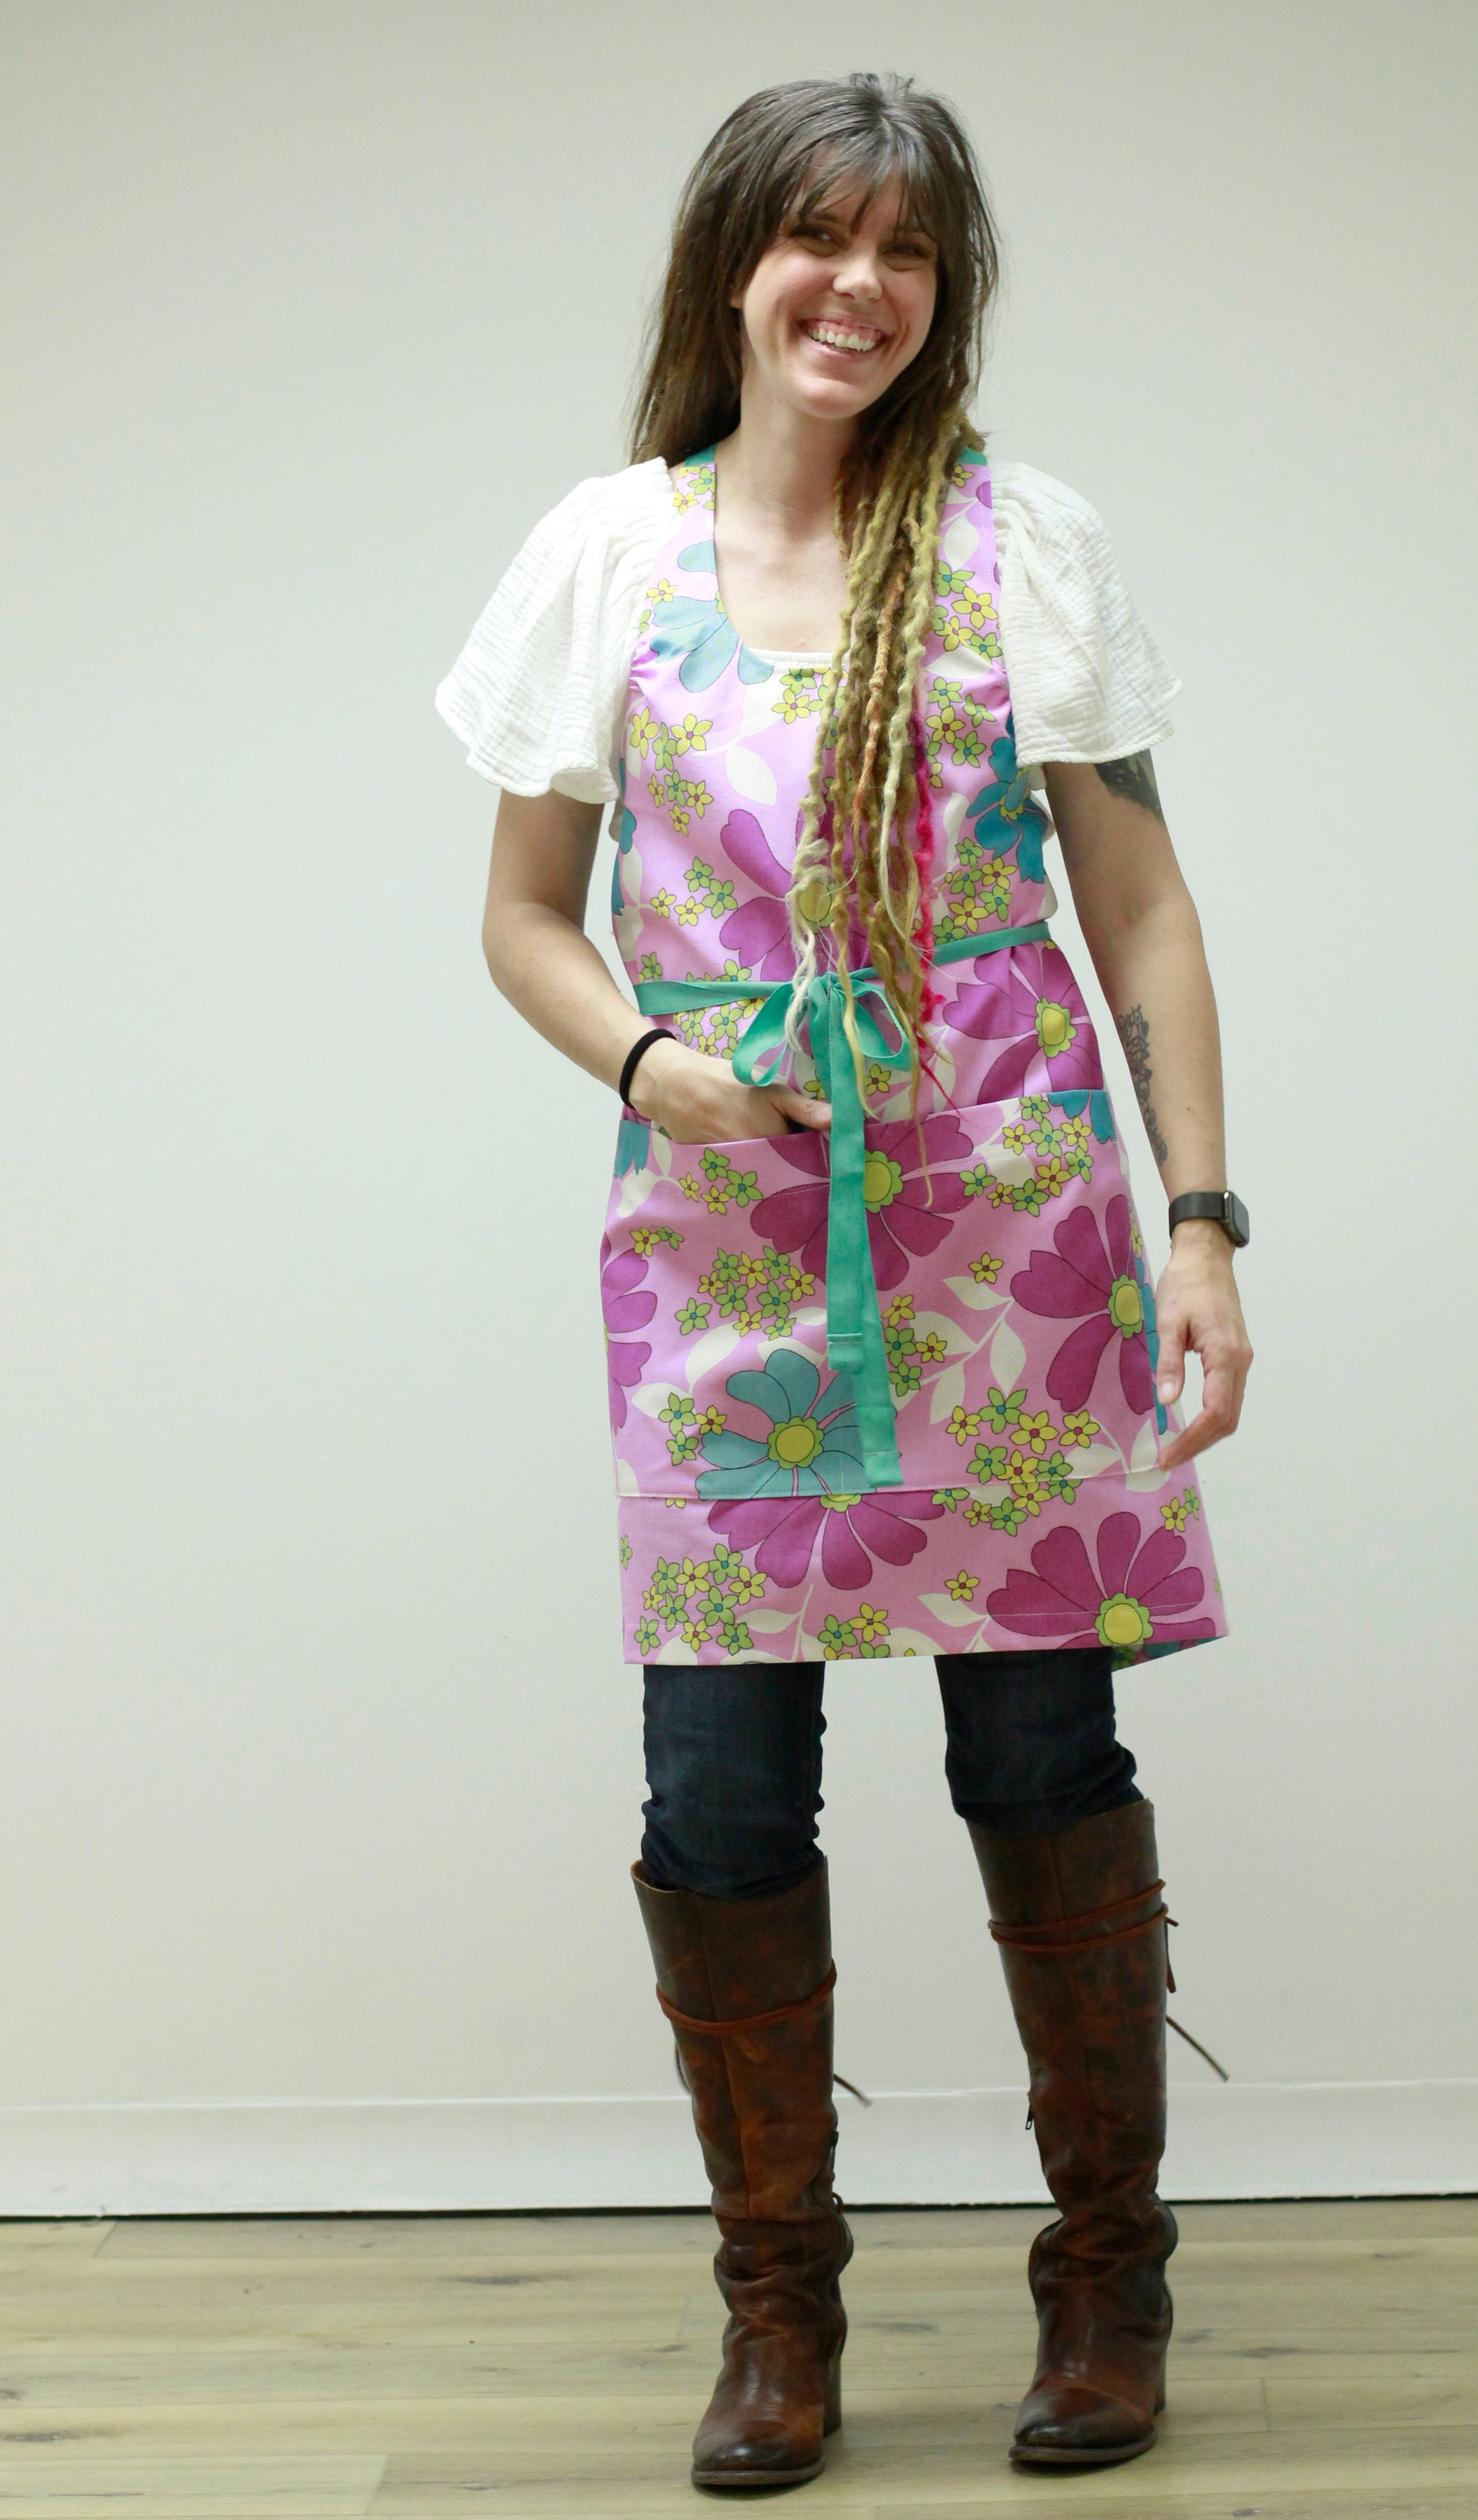 Chef Apron - Womens Cut in a 60's Print - Front View model smiling